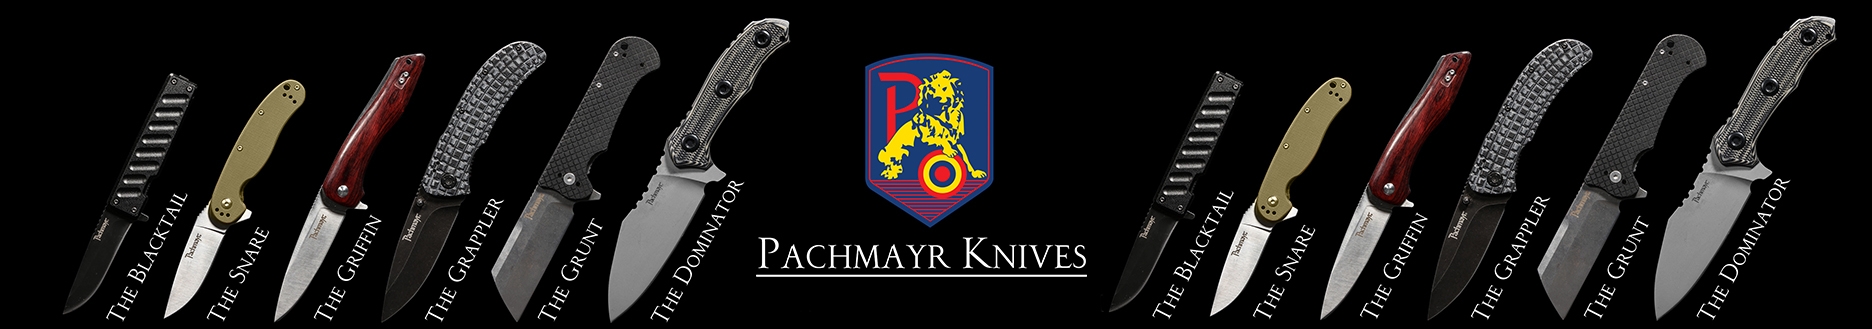 Pachmayr Knives